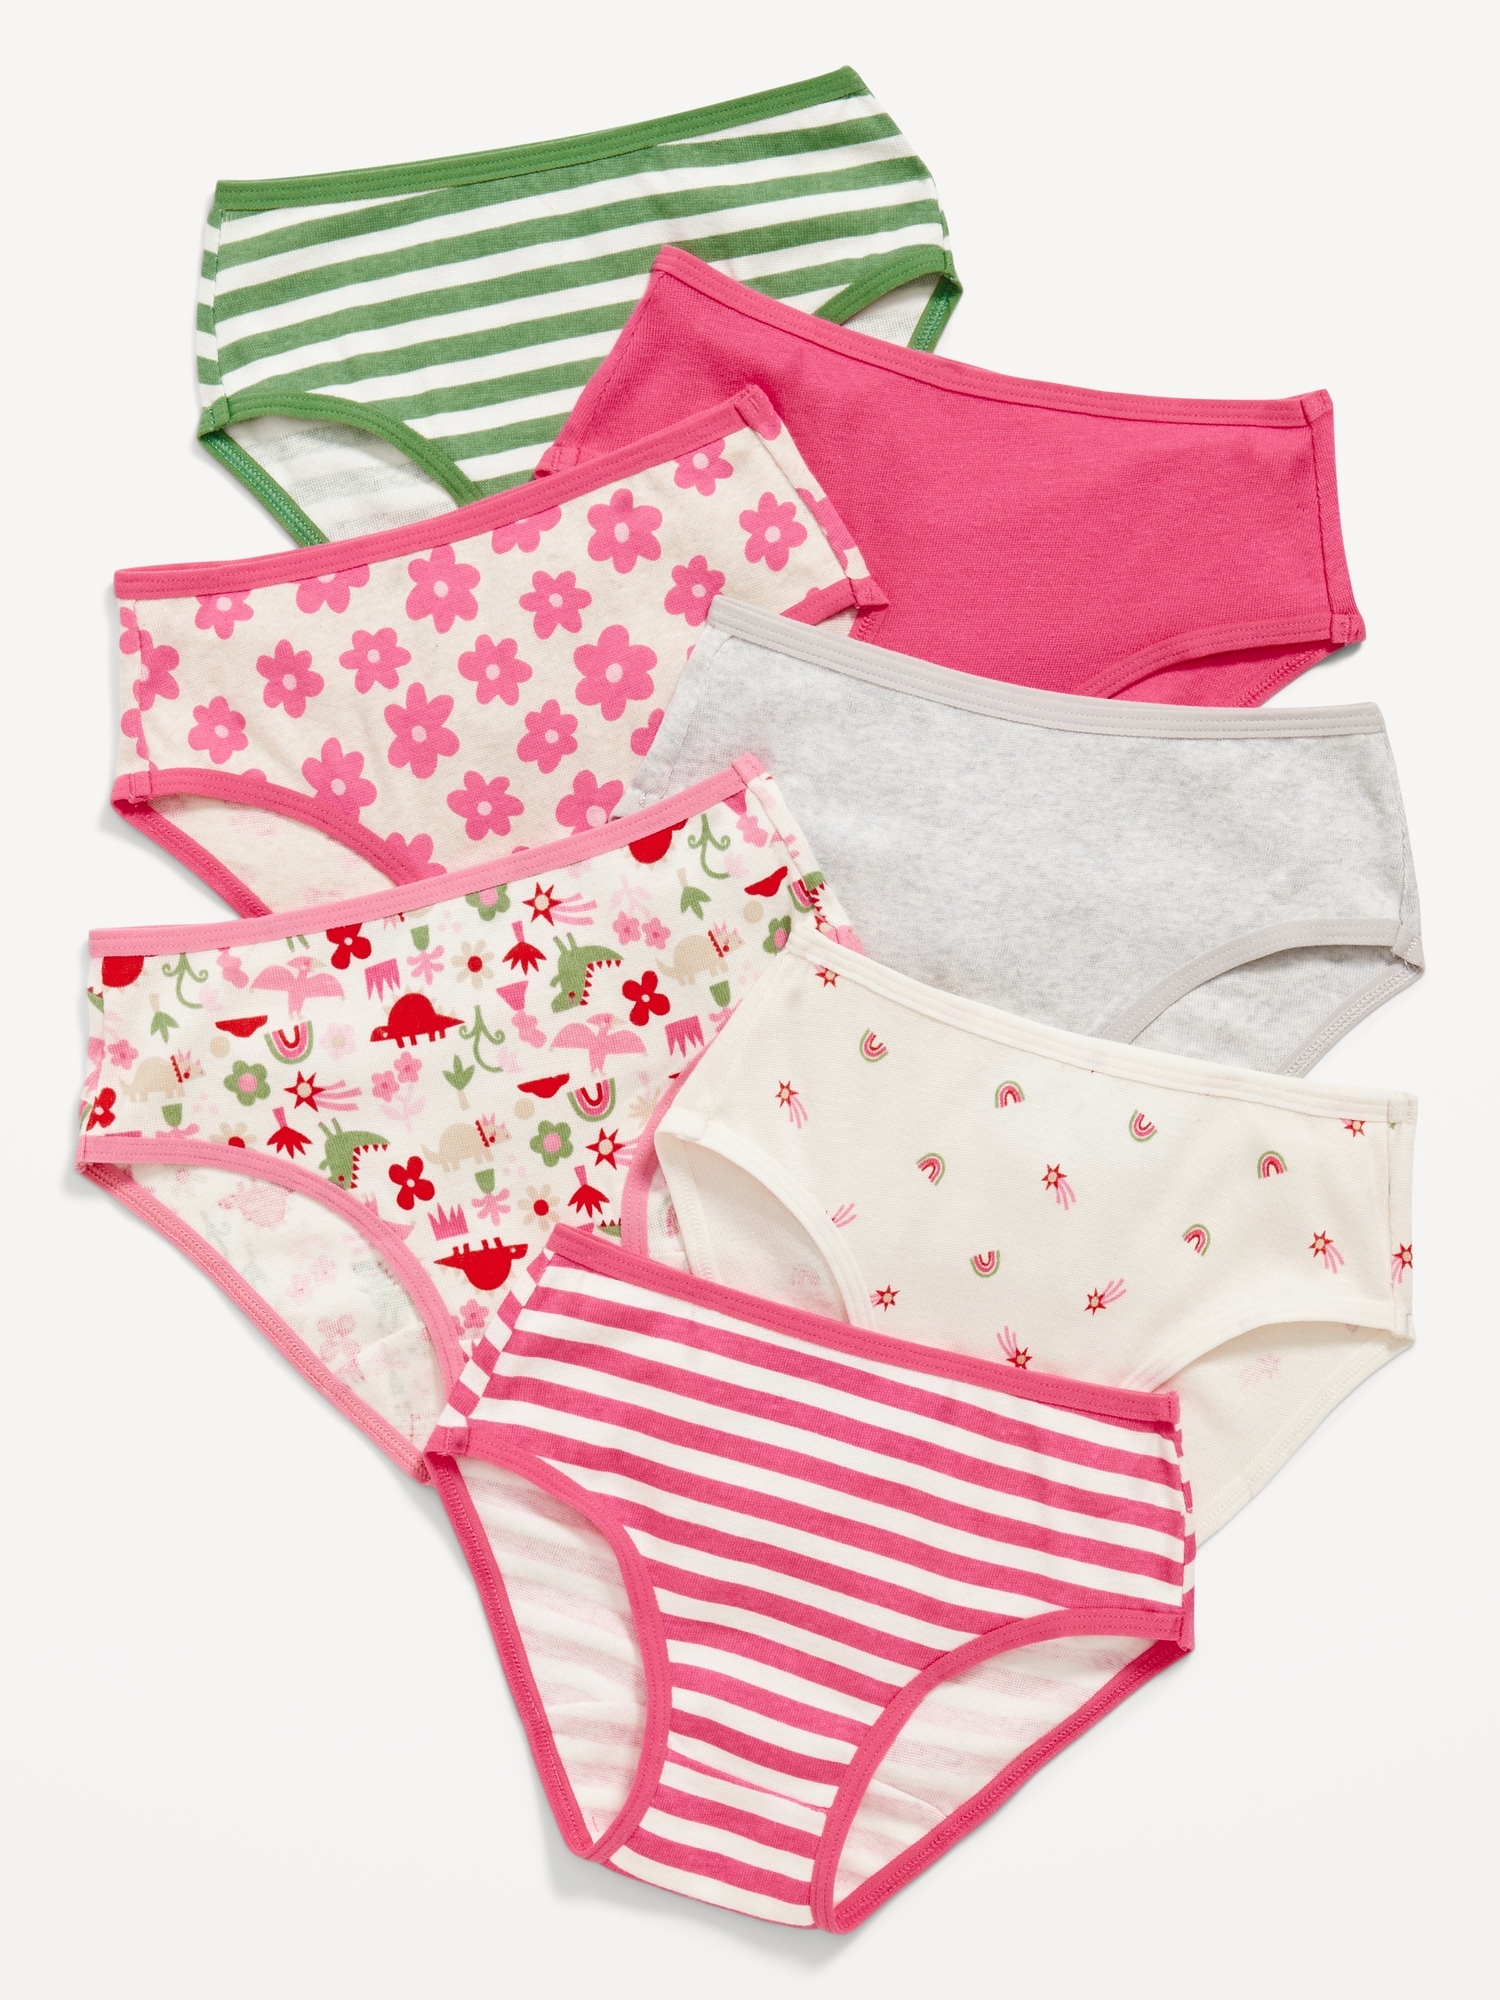 Love Diana Girls' 7-Pack 100% Combed Cotton Underwear with Fun Prints with  Honey in Sizes 4 and 6